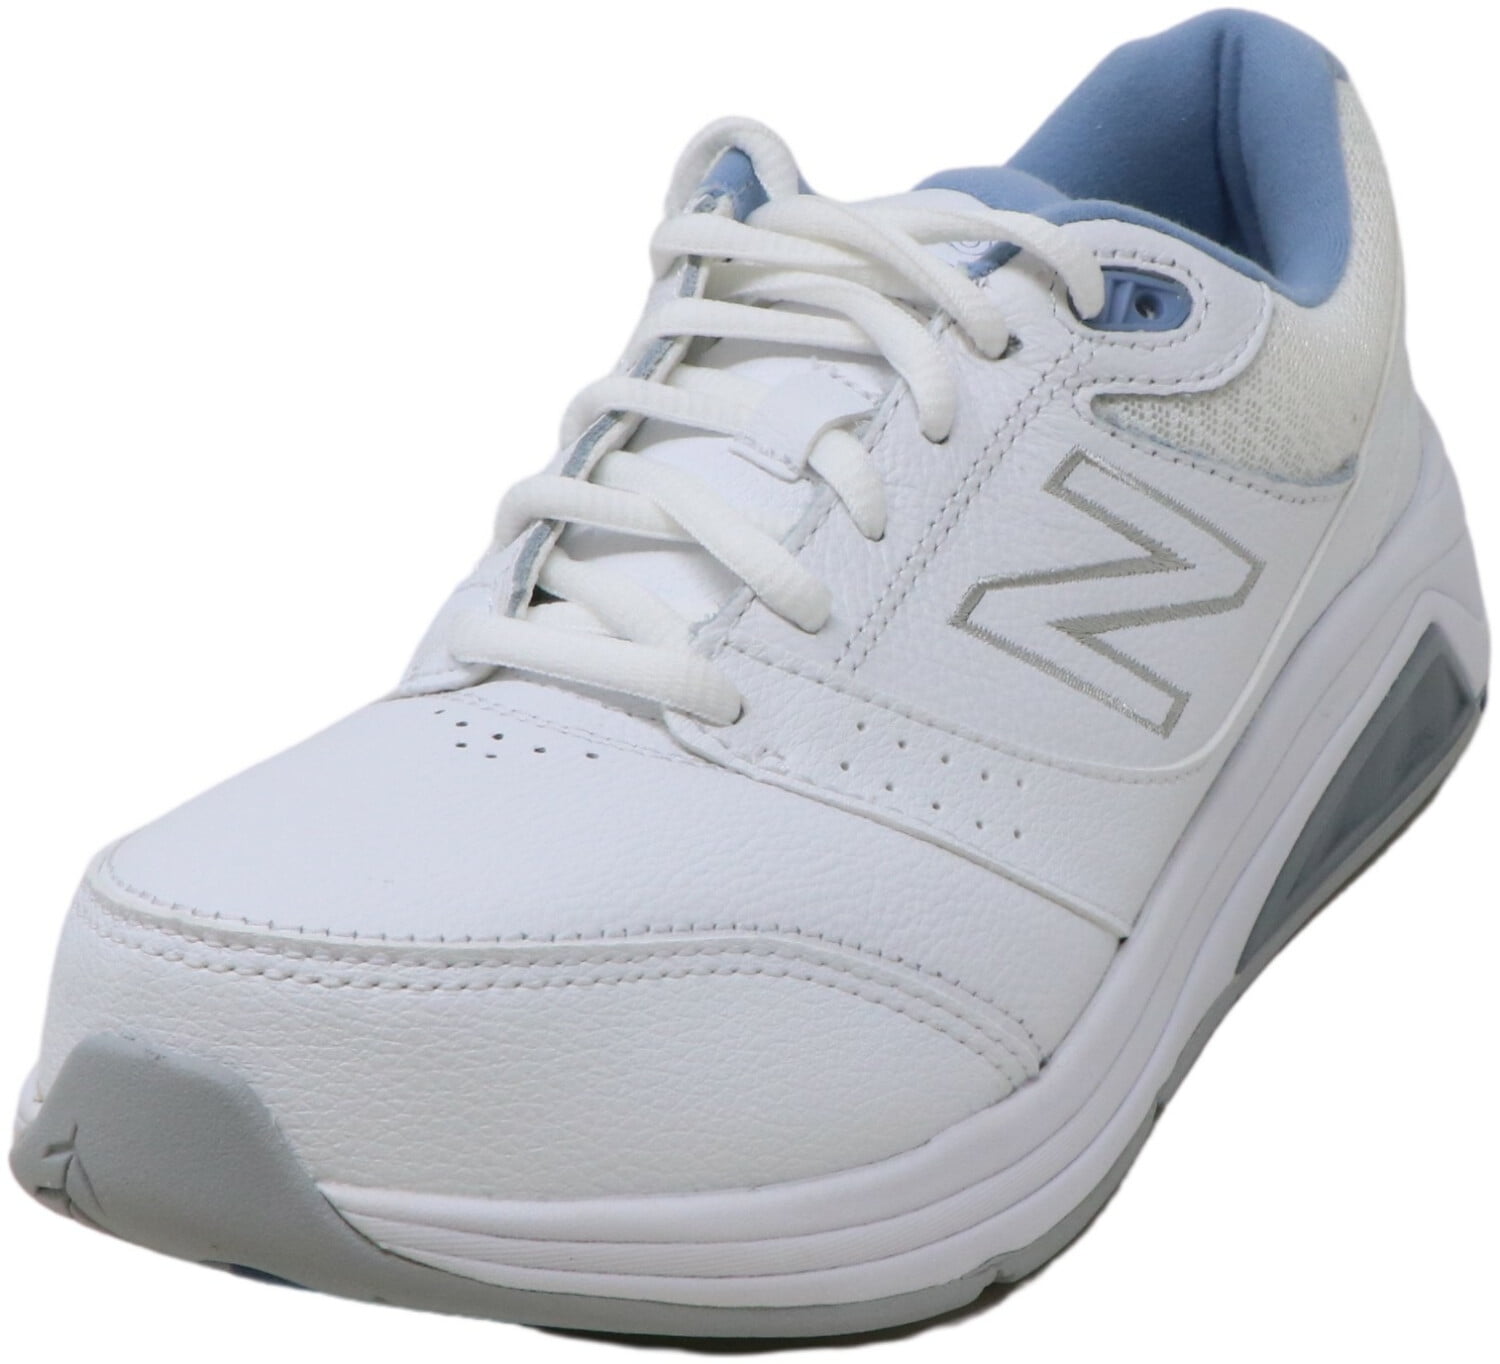 New Balance Women's Ww928 Wb2 Ankle-High Leather Walking - 7.5M ...